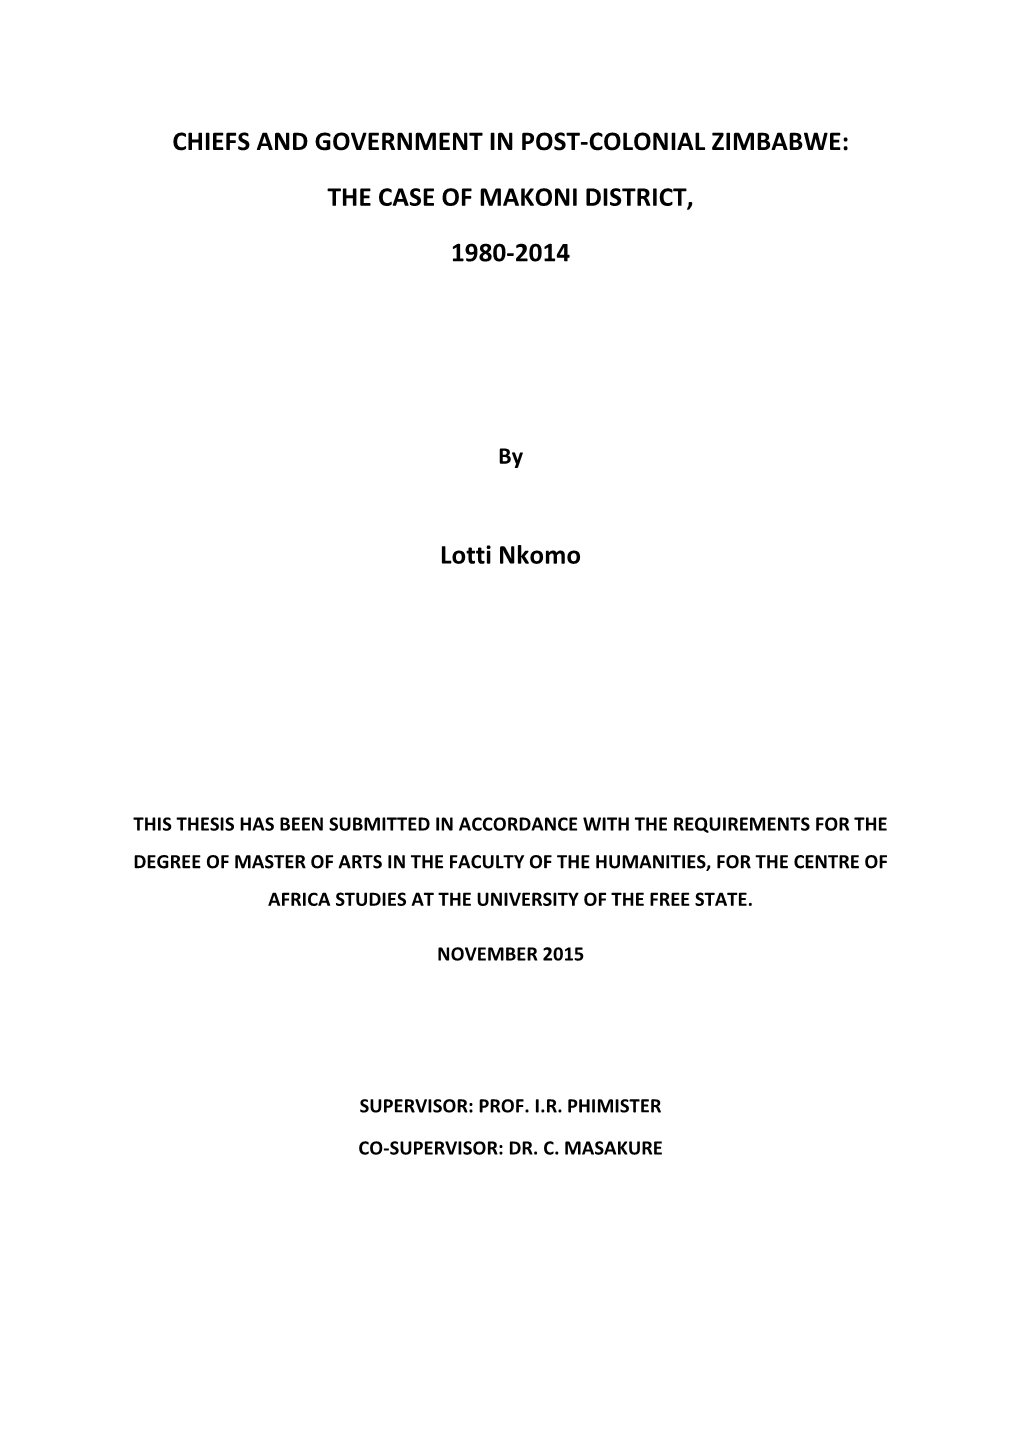 CHIEFS and GOVERNMENT in POST-COLONIAL ZIMBABWE: the CASE of MAKONI DISTRICT, 1980-2014 Lotti Nkomo